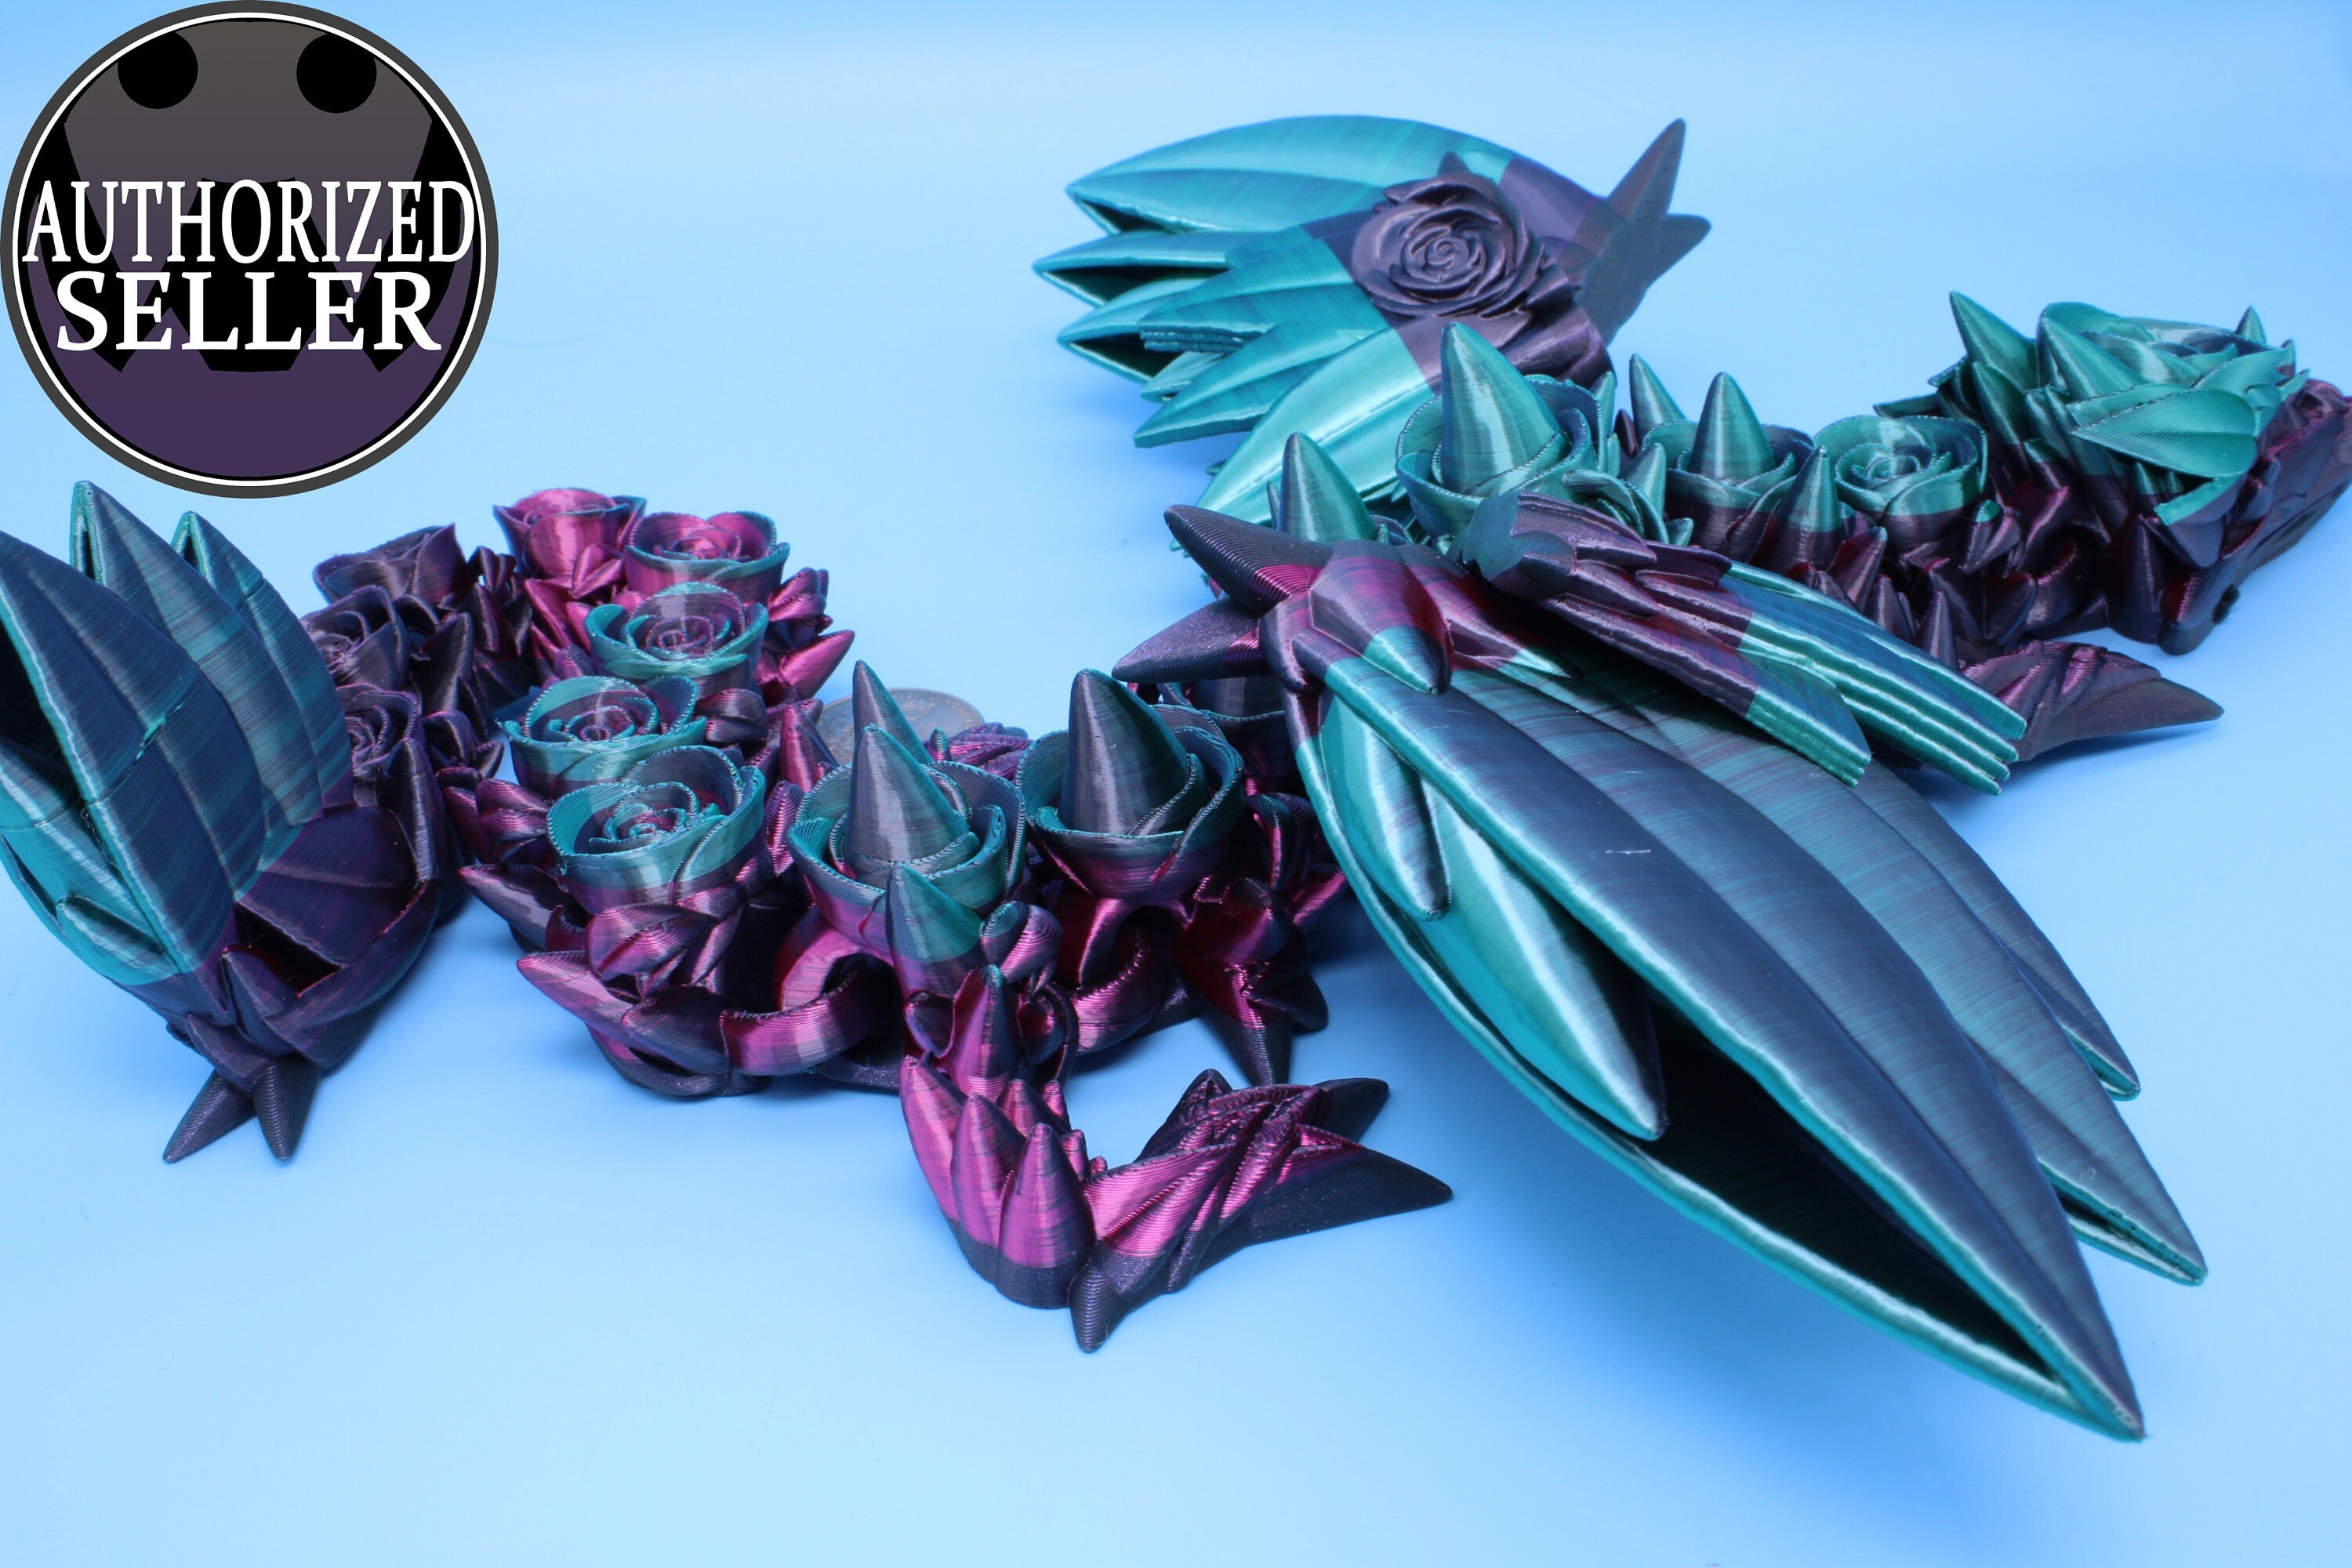 Adult Crystal Wing Dragon- Pink | Miniature | 3D printed | Fidget Toy |  10.5in.